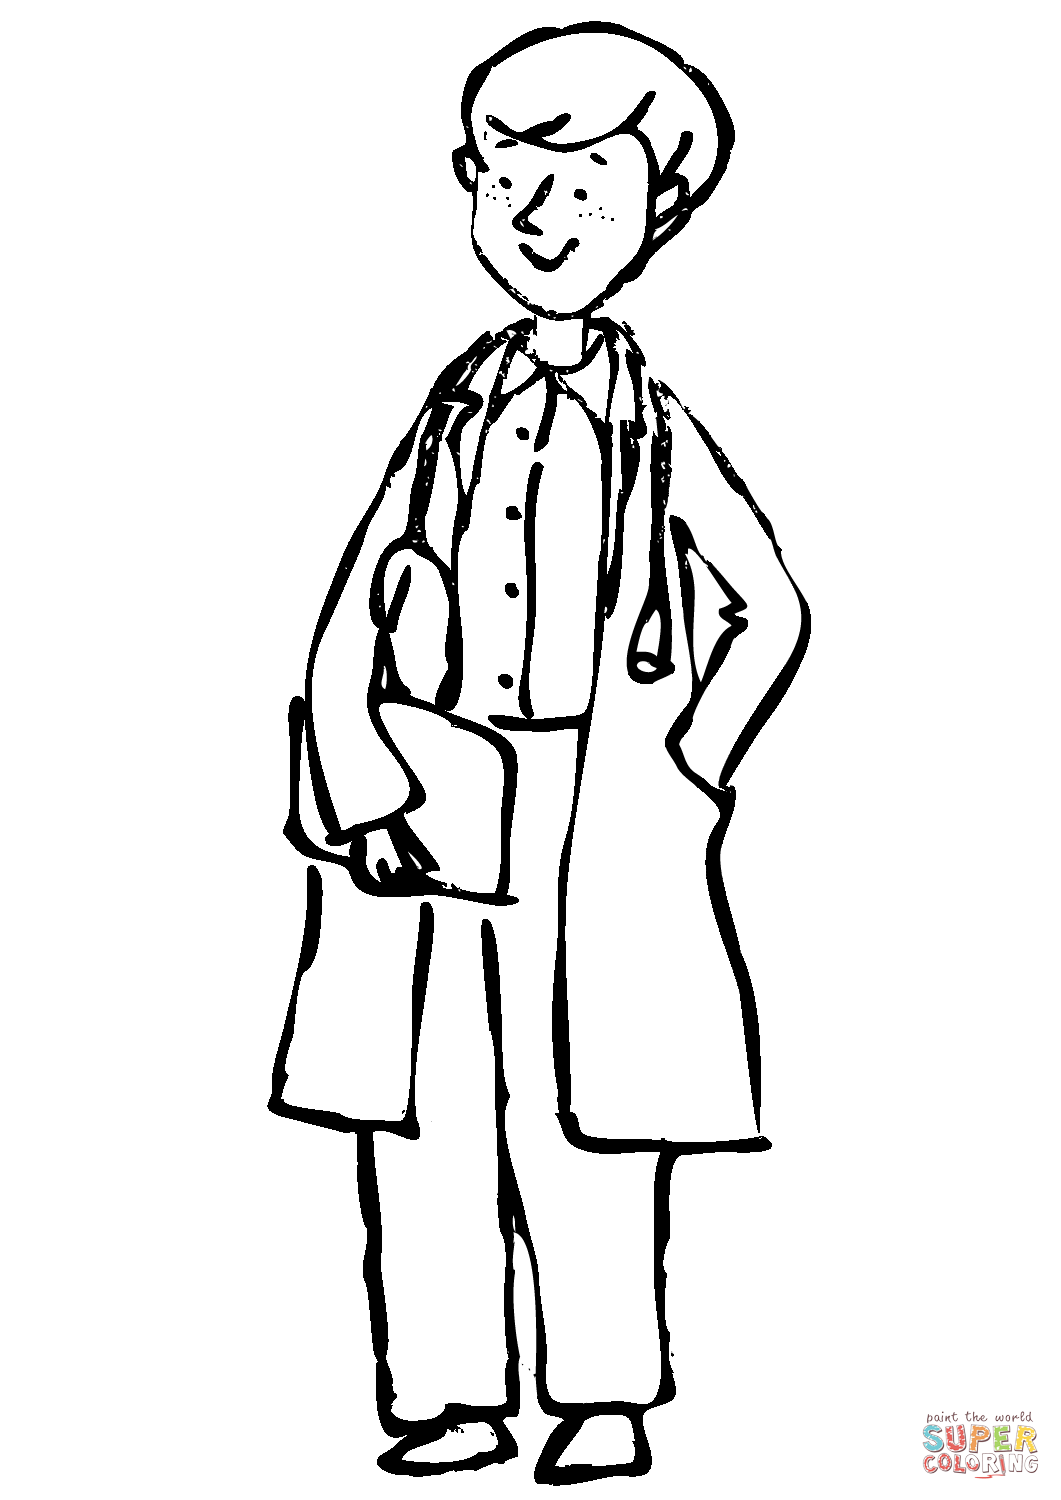 Cartoon doctor coloring page free printable coloring pages